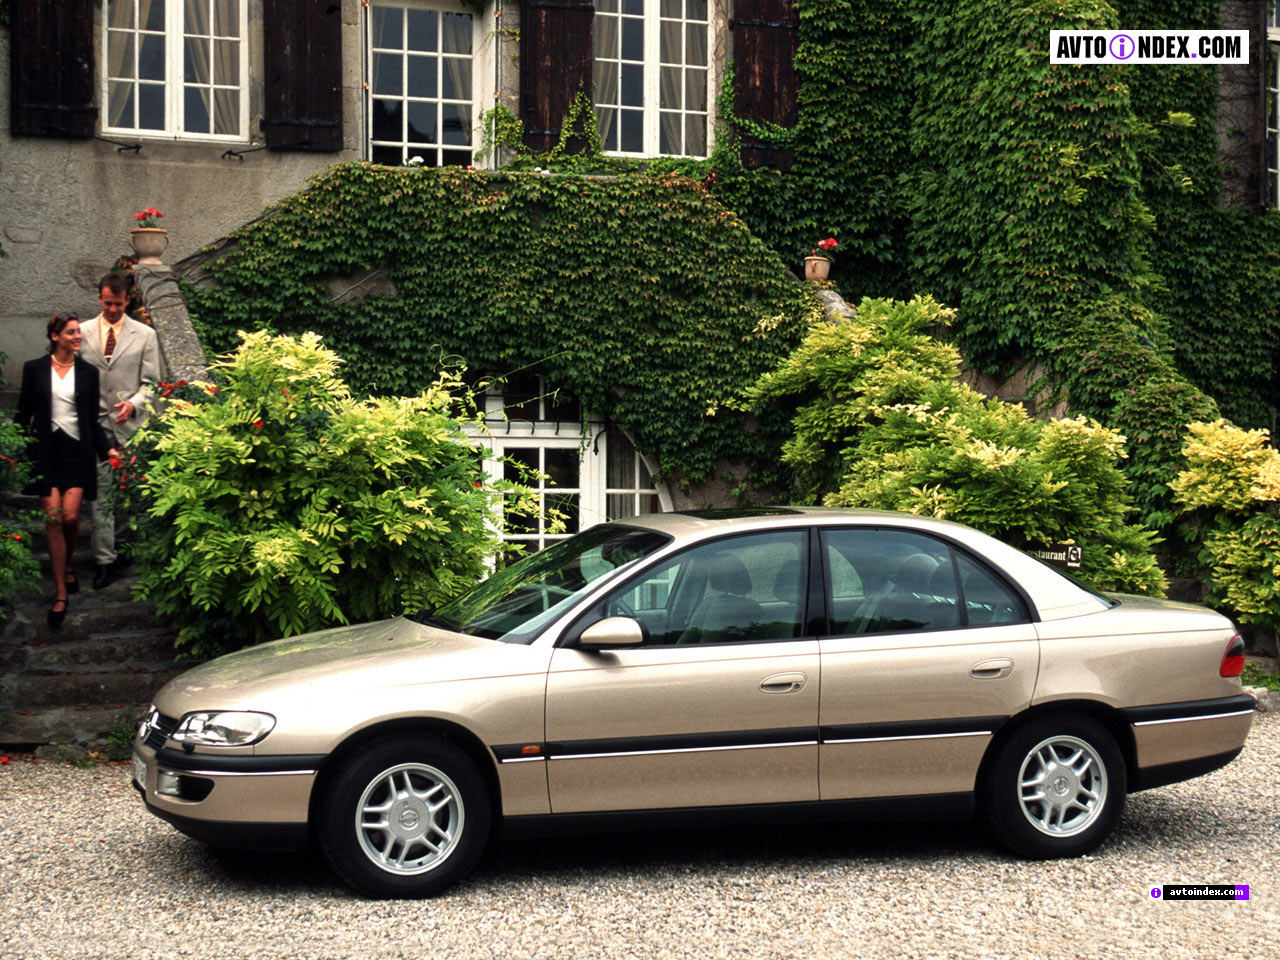 Opel Omega 30 - huge collection of cars, auto news and reviews, car vitals,